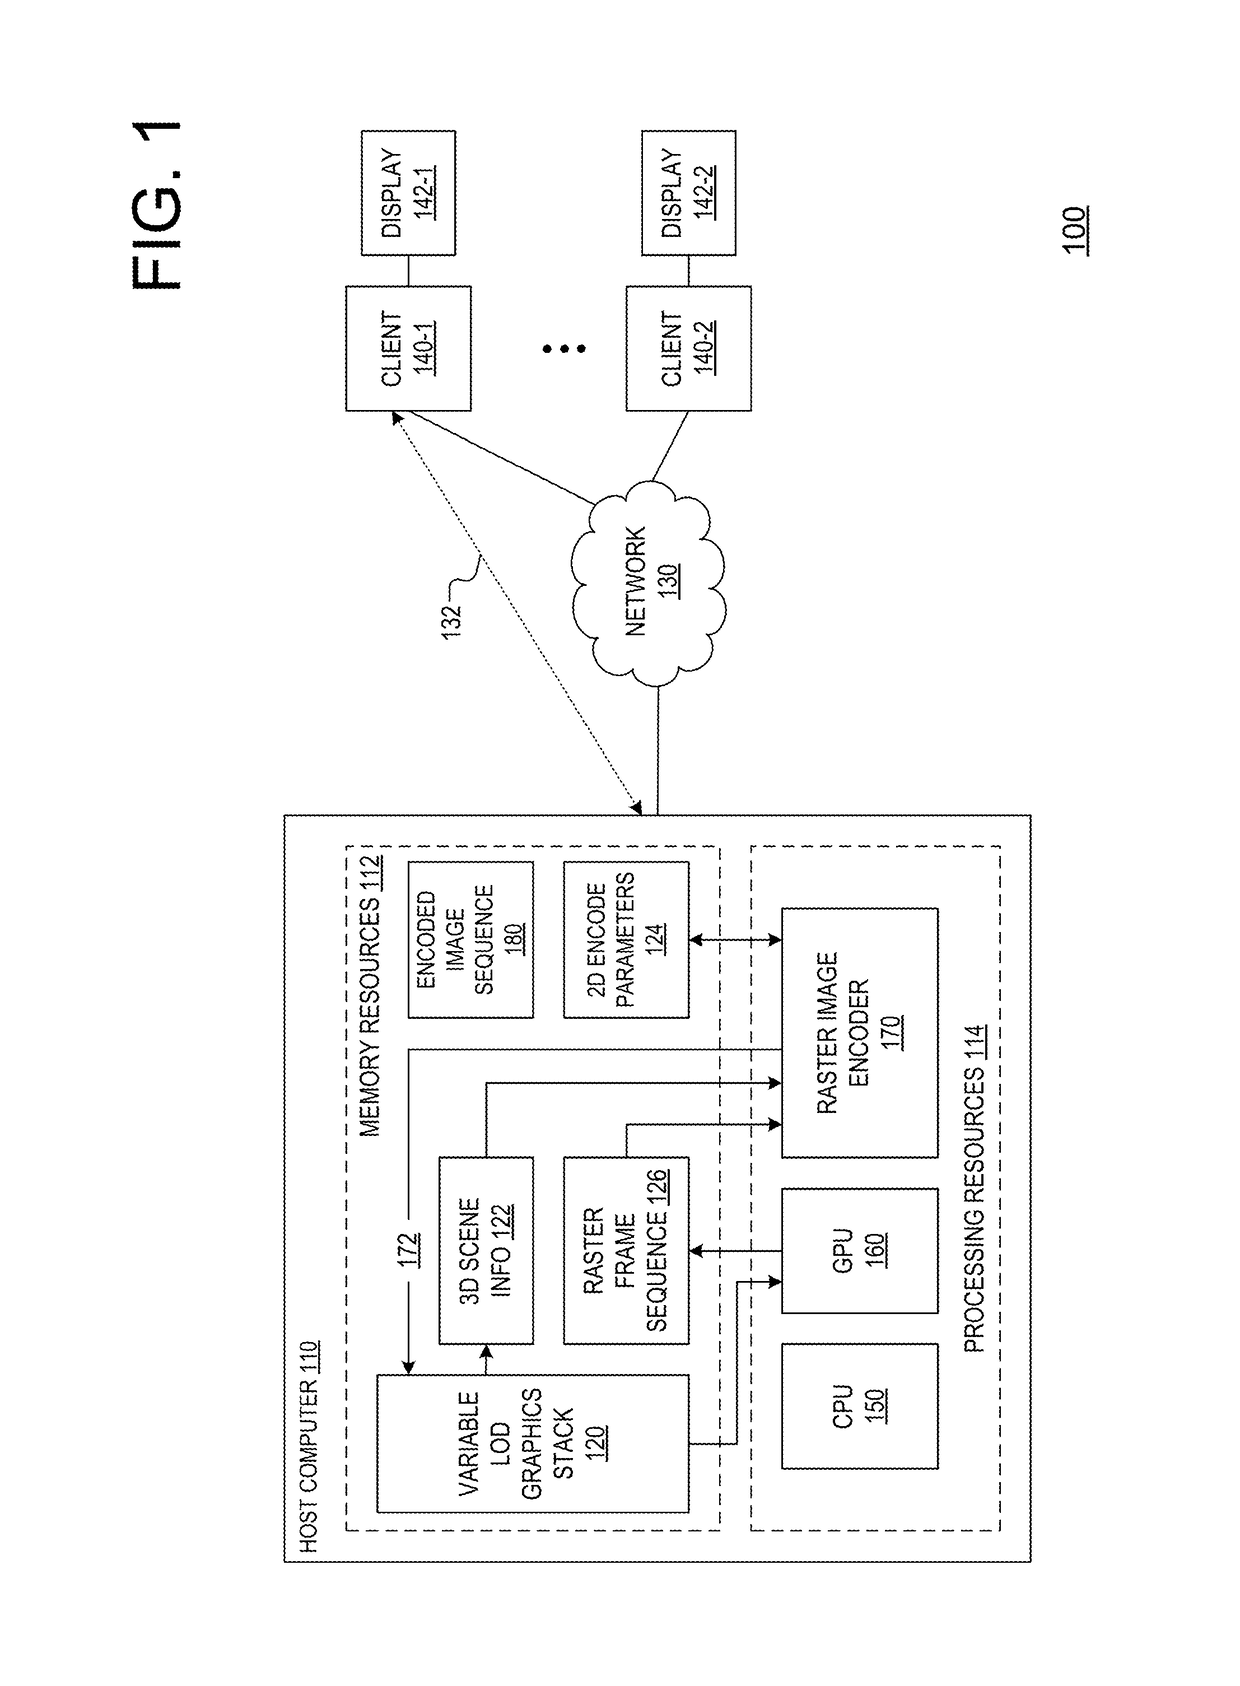 Method and apparatus for rasterizing and encoding vector graphics